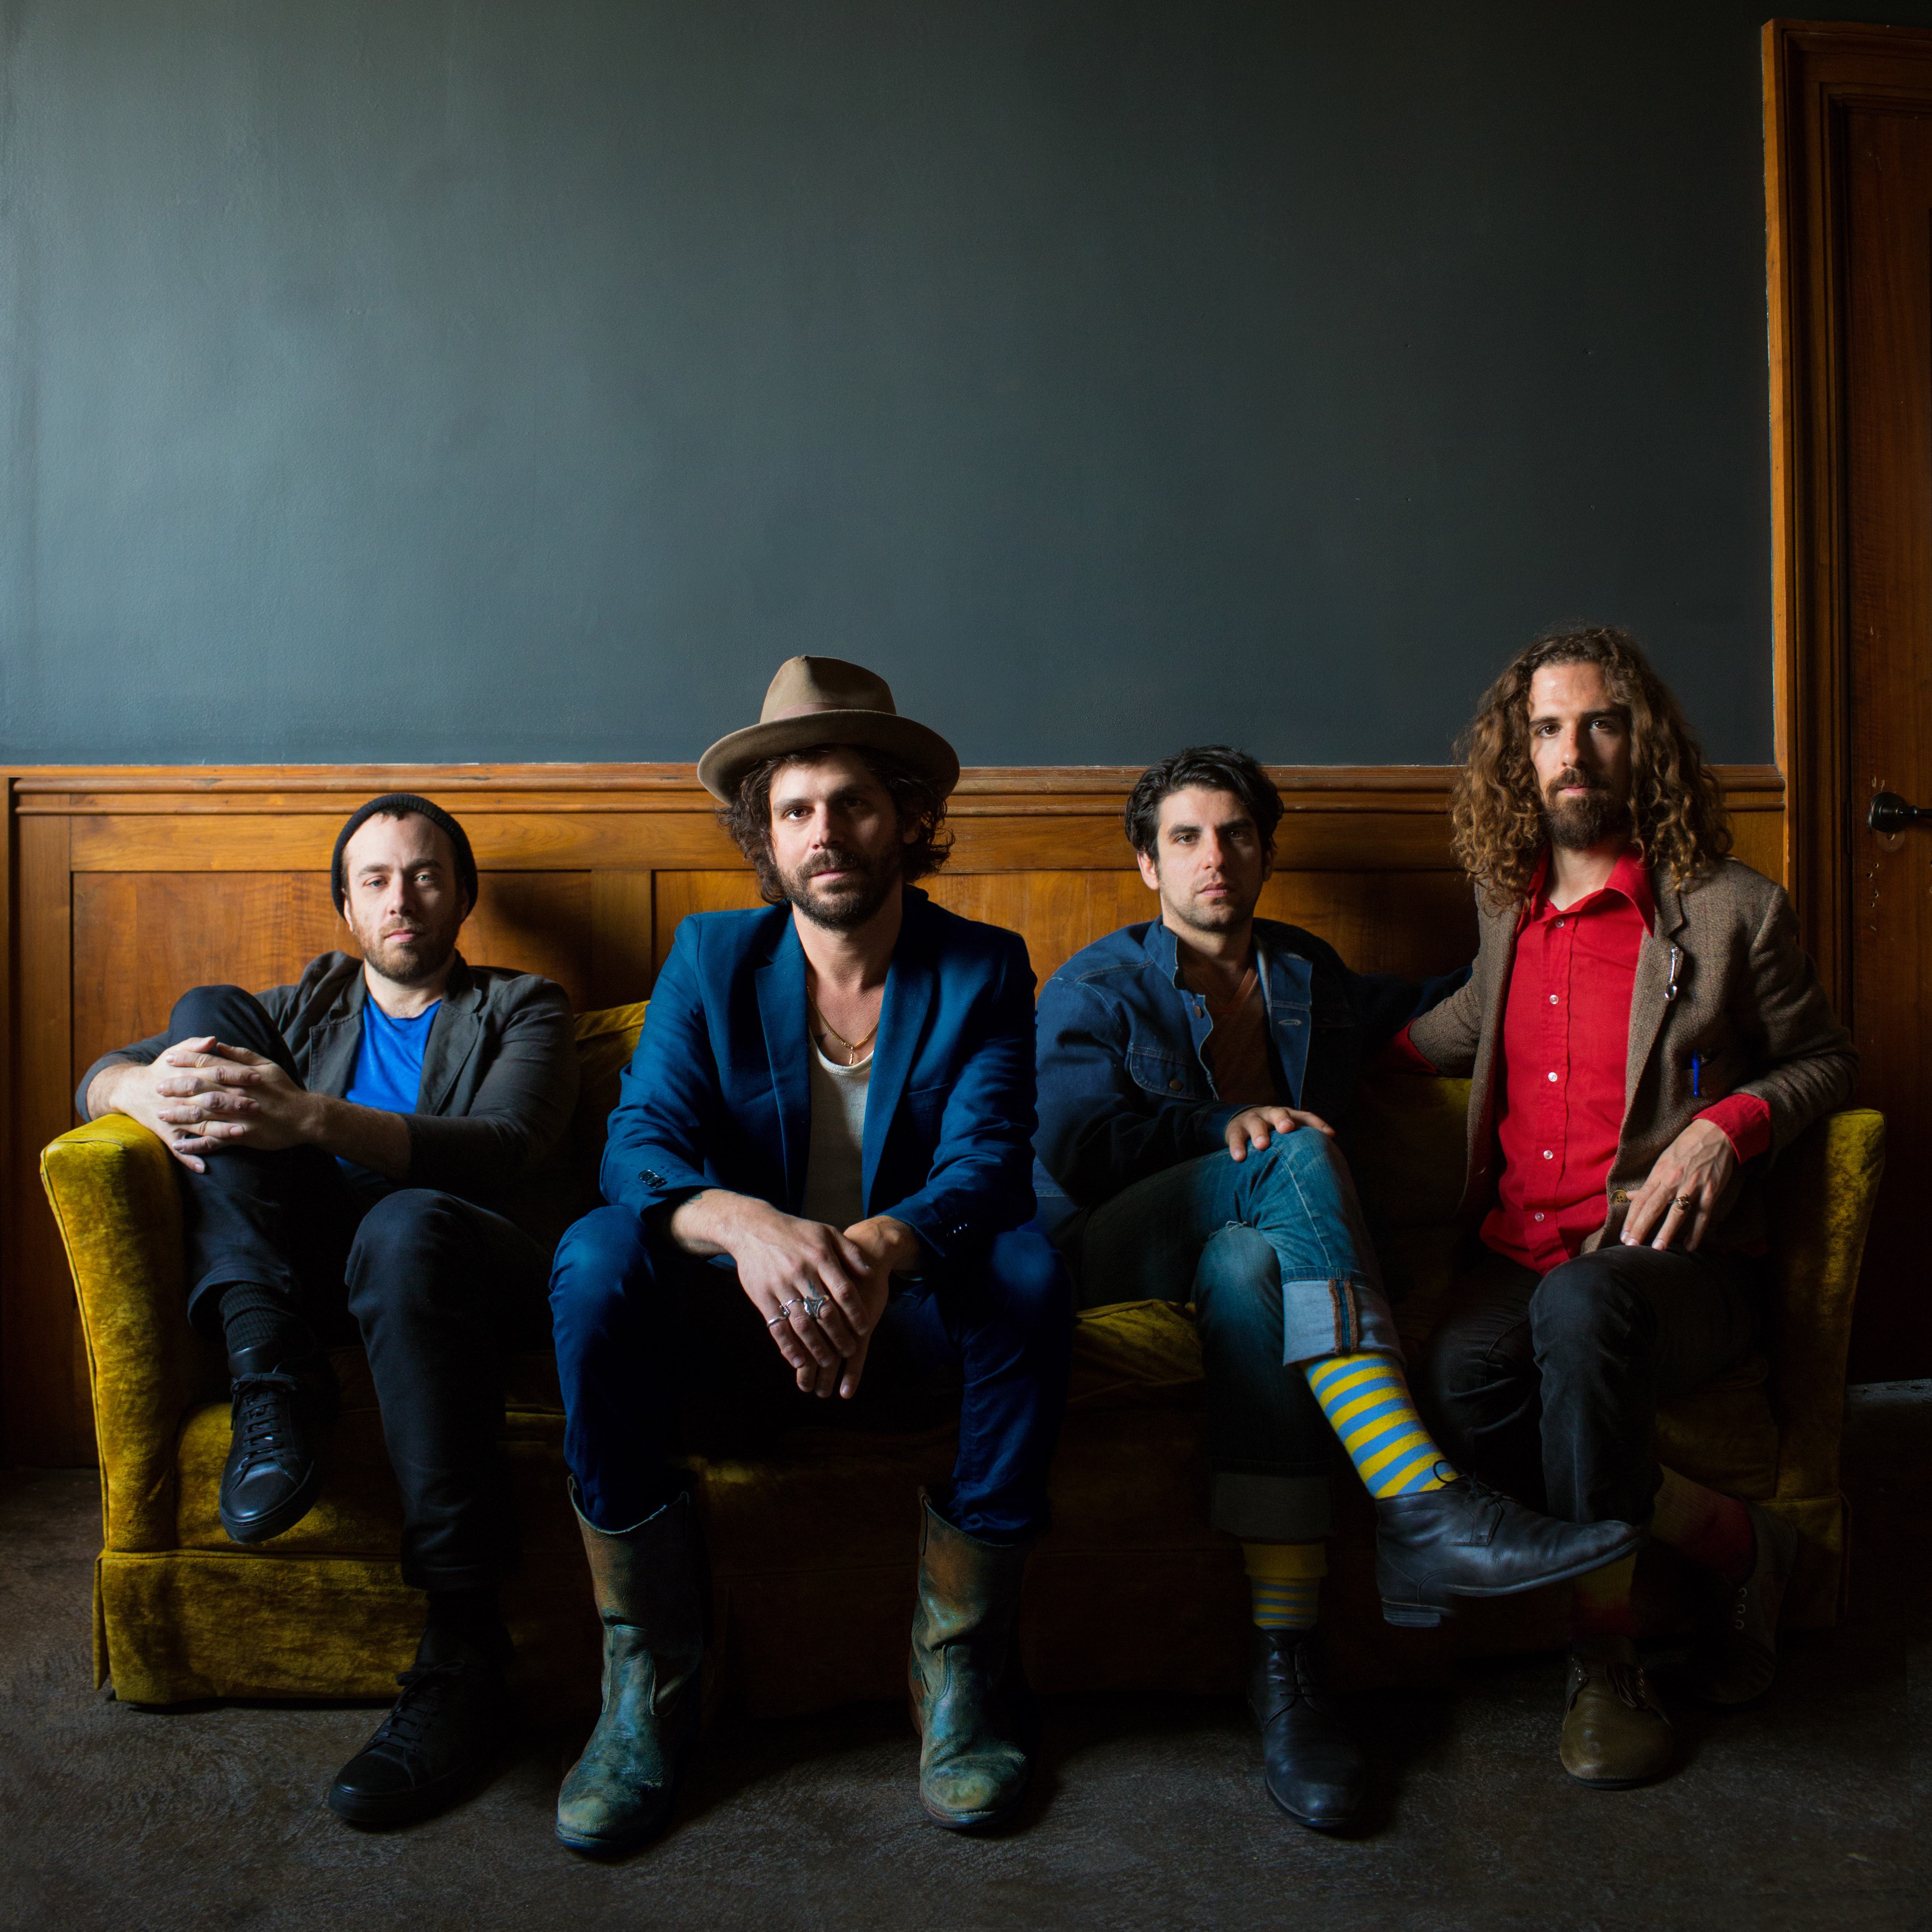 Coming Home to Myself: A Conversation With Langhorne Slim